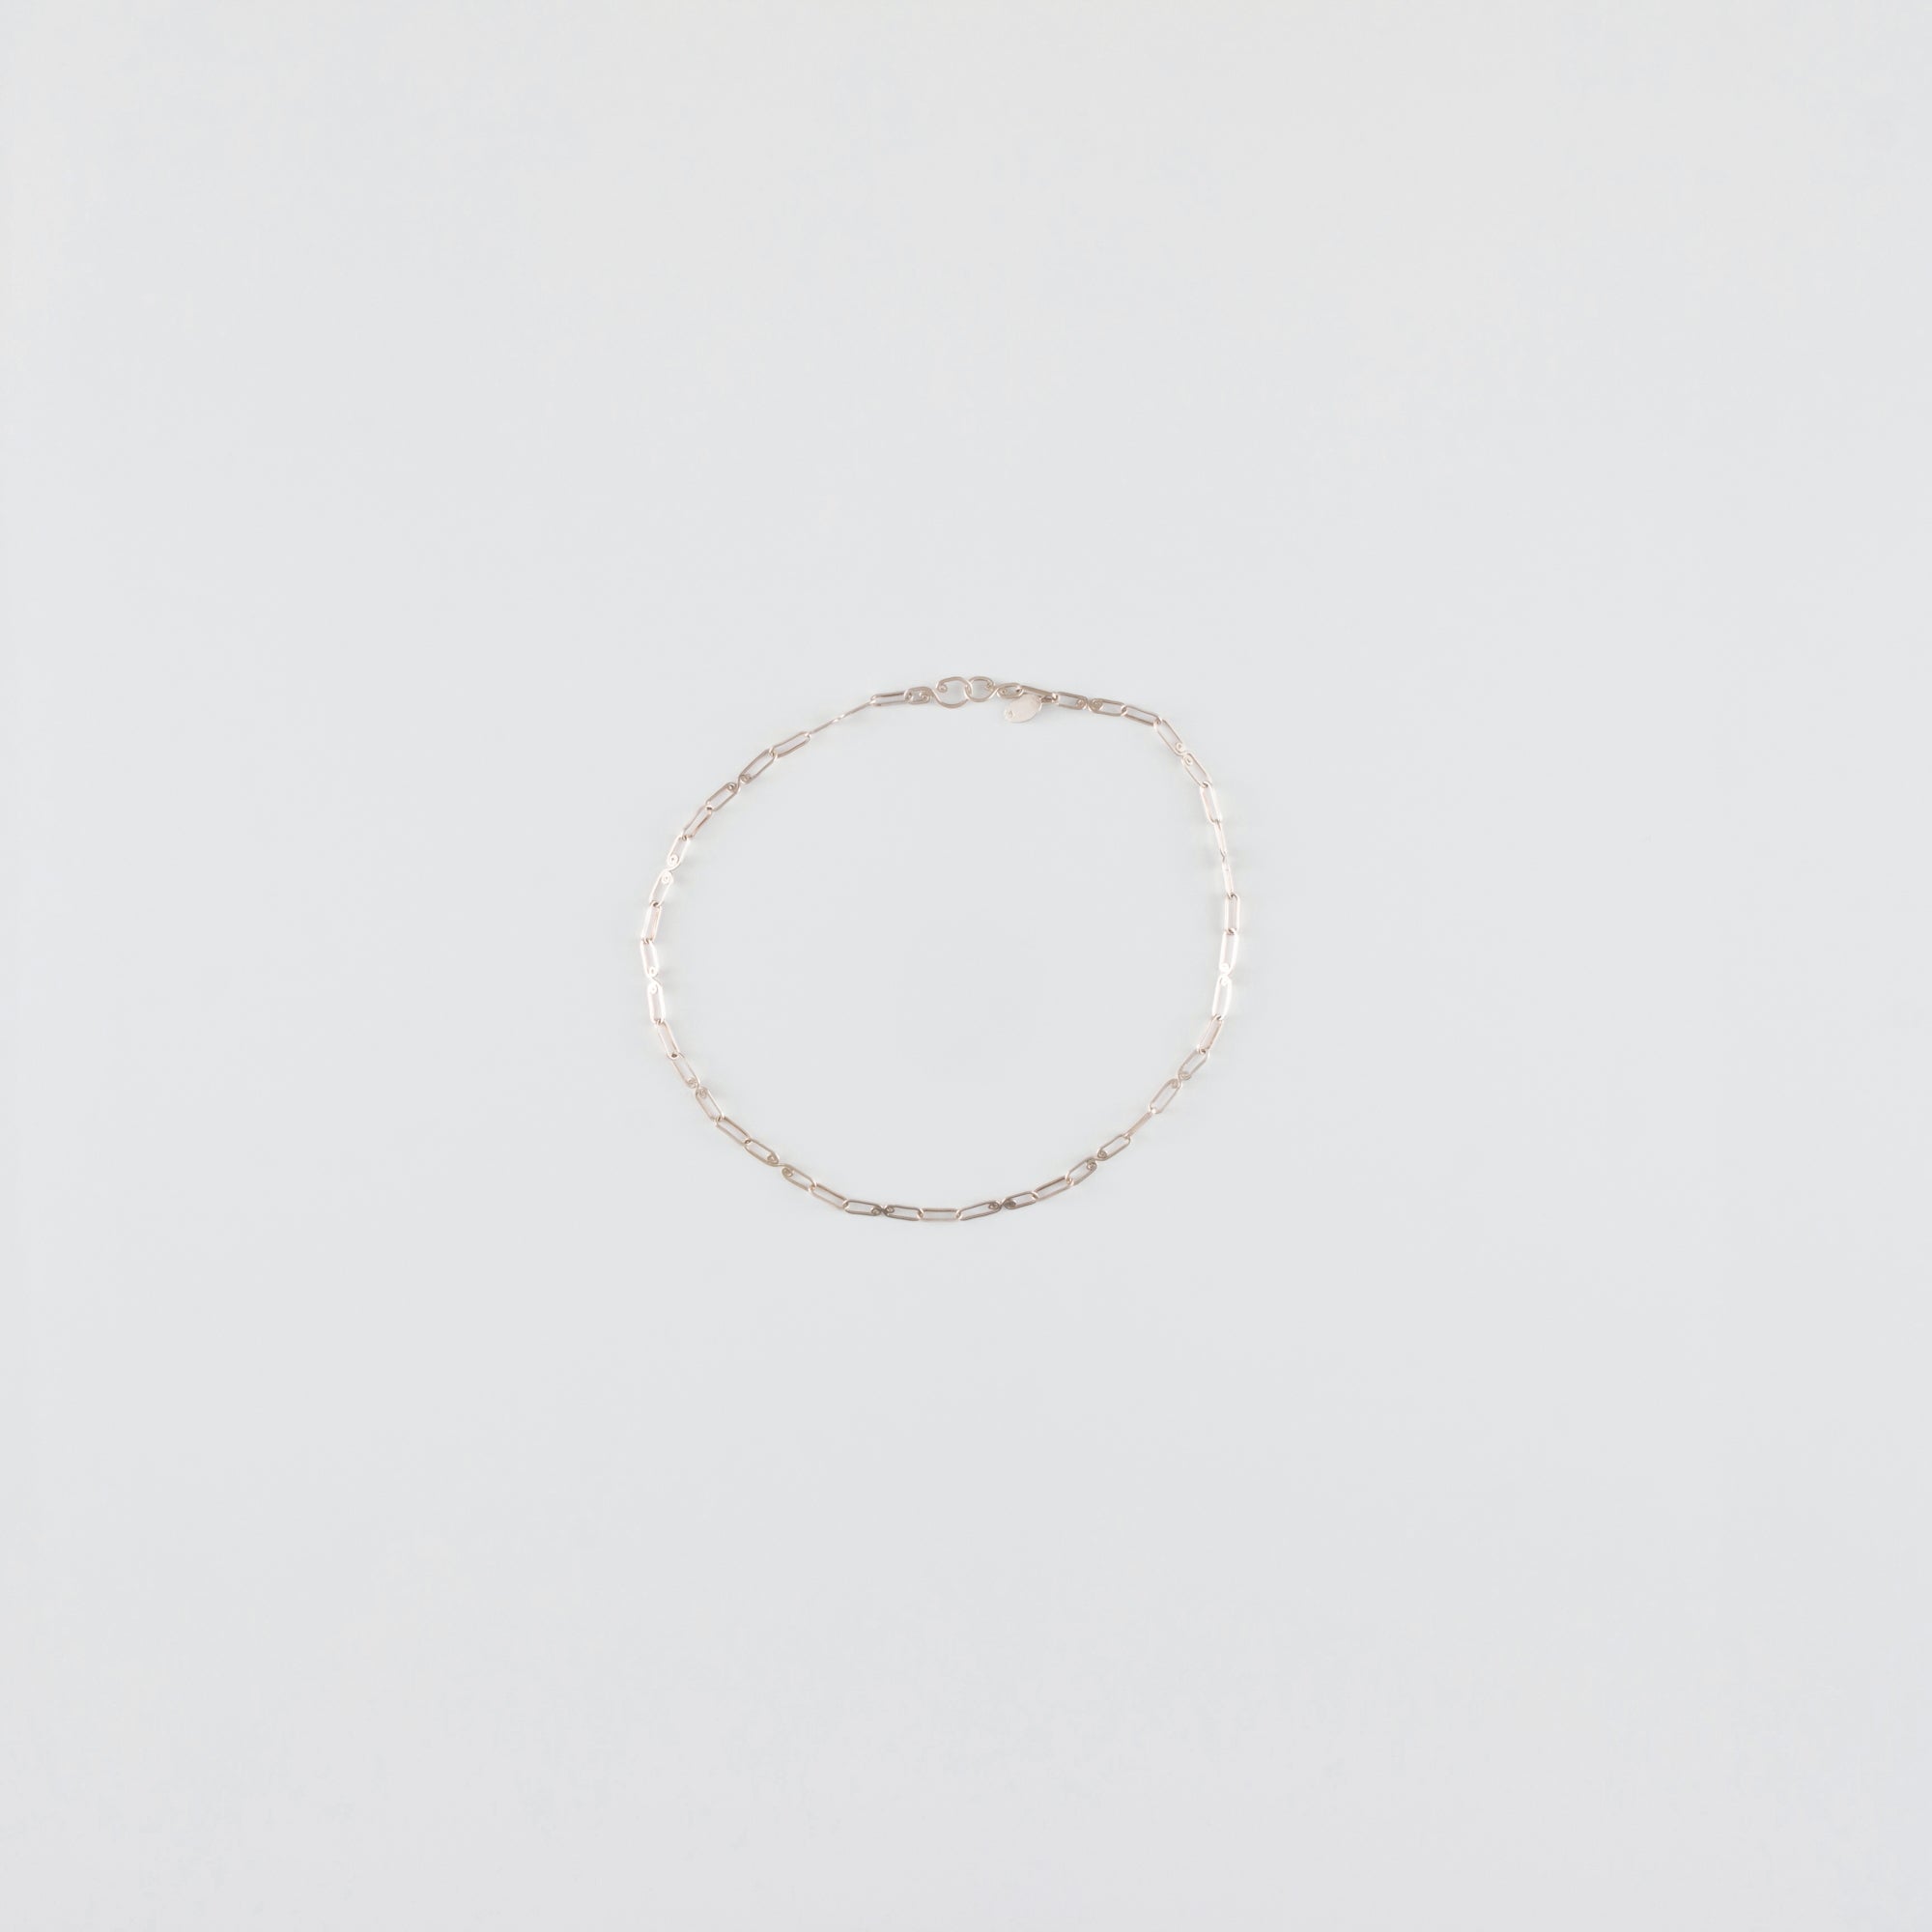 SOFIE CHAIN // STERLING SILVER